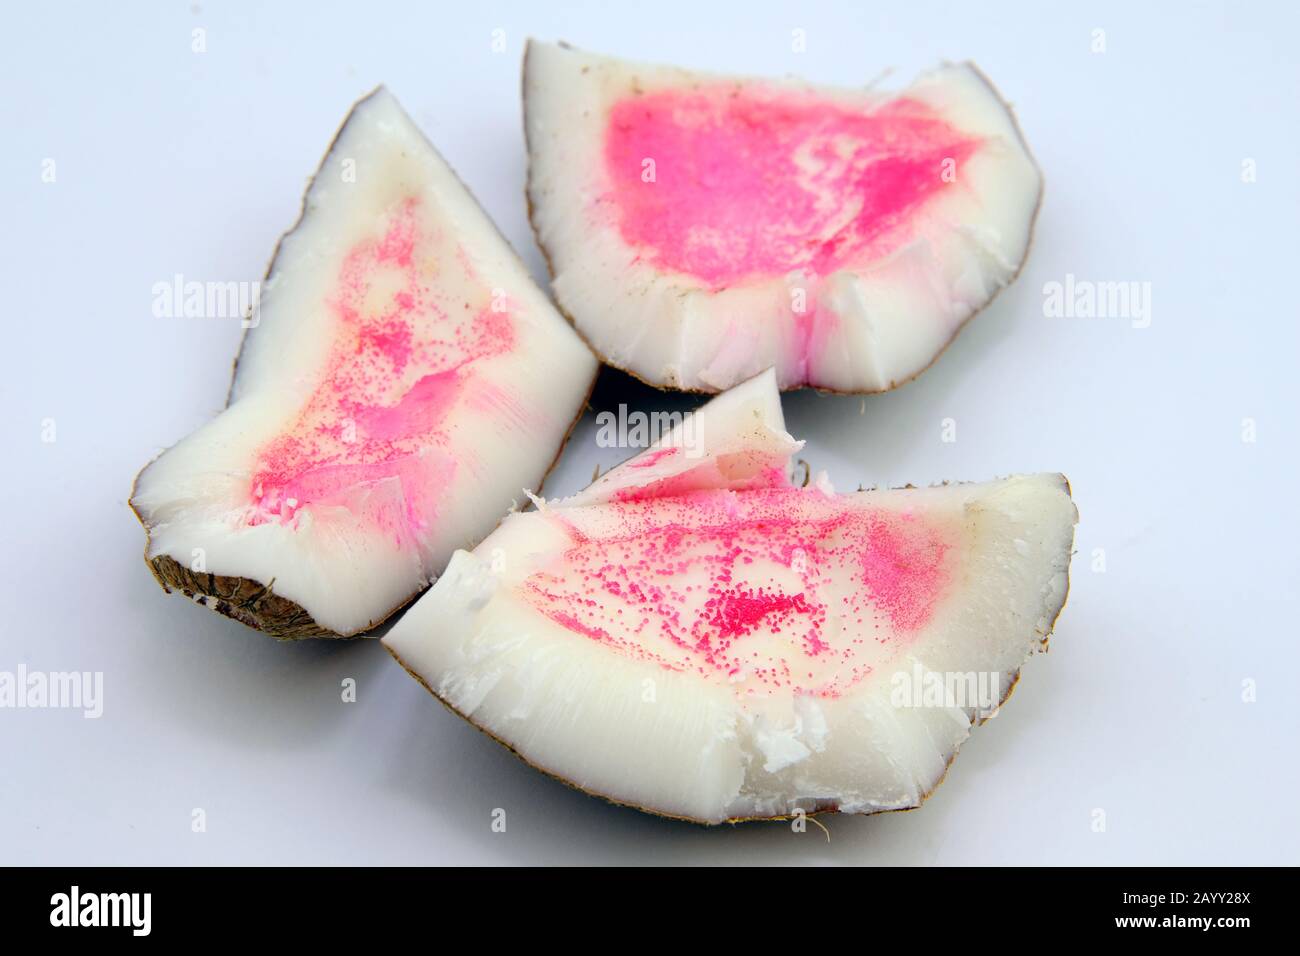 Pink spots on coconut. Coconut turned pink after opening because of polyphenol oxidase or microbial attack. Stock Photo